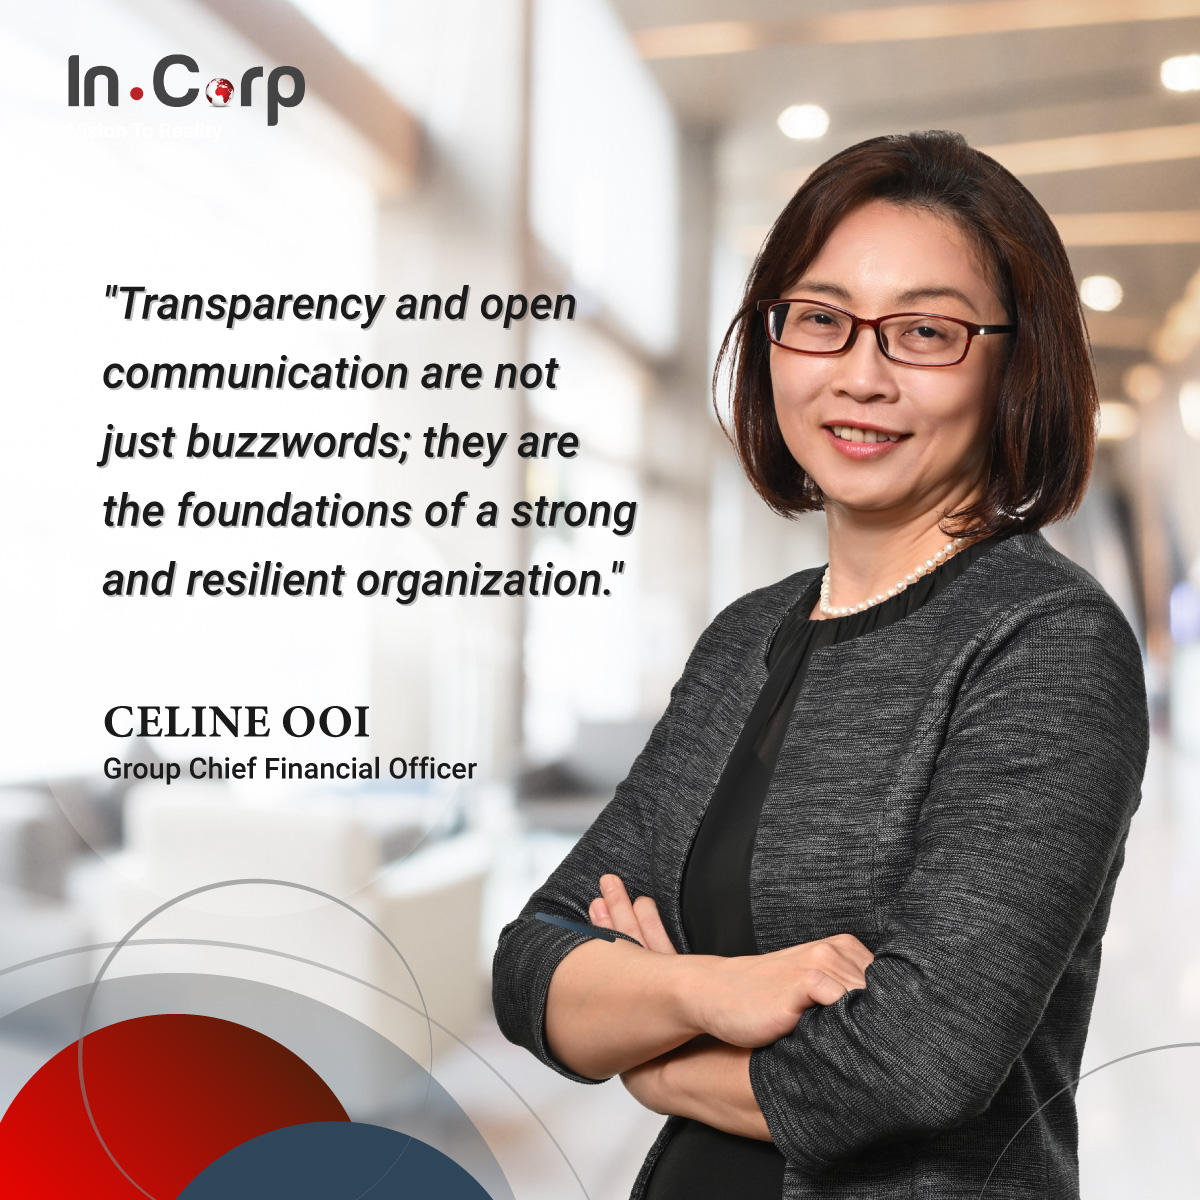 InCorp CFO Celine Ooi reinforces these principles that fortify our organization's robust structure. Click the link to explore our services today: incorp.asia/singapore/serv… #InCorpGlobal #Transparency #OpenCommunication #WisdomQuote